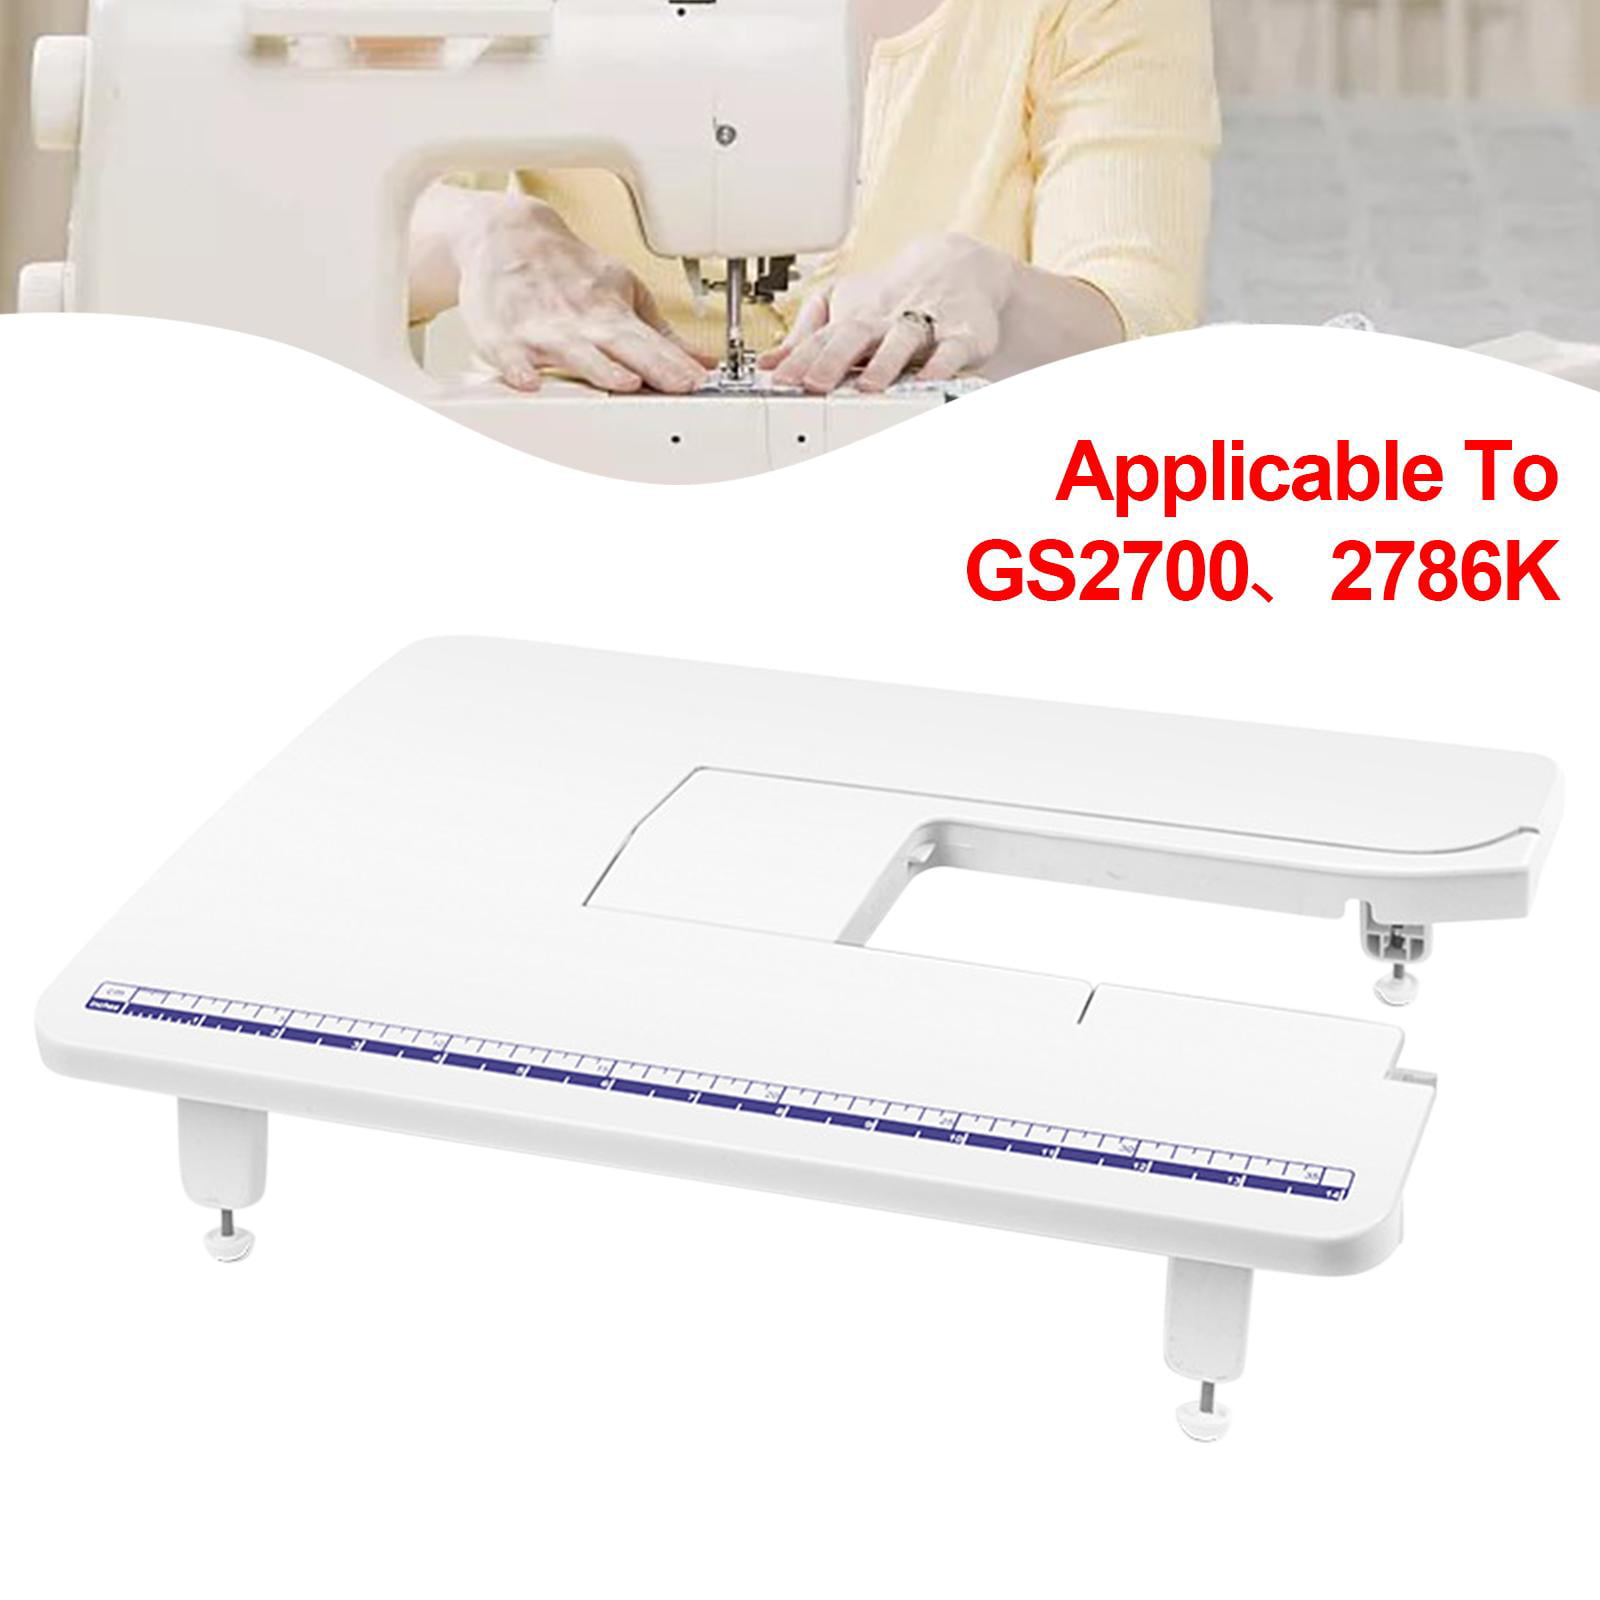 Sewfect Sewing Machine Extension Table for Brother GS1700 GS2700 GS3700  GS3710 GS3750 Electric Sewing Machine Price in India - Buy Sewfect Sewing  Machine Extension Table for Brother GS1700 GS2700 GS3700 GS3710 GS3750